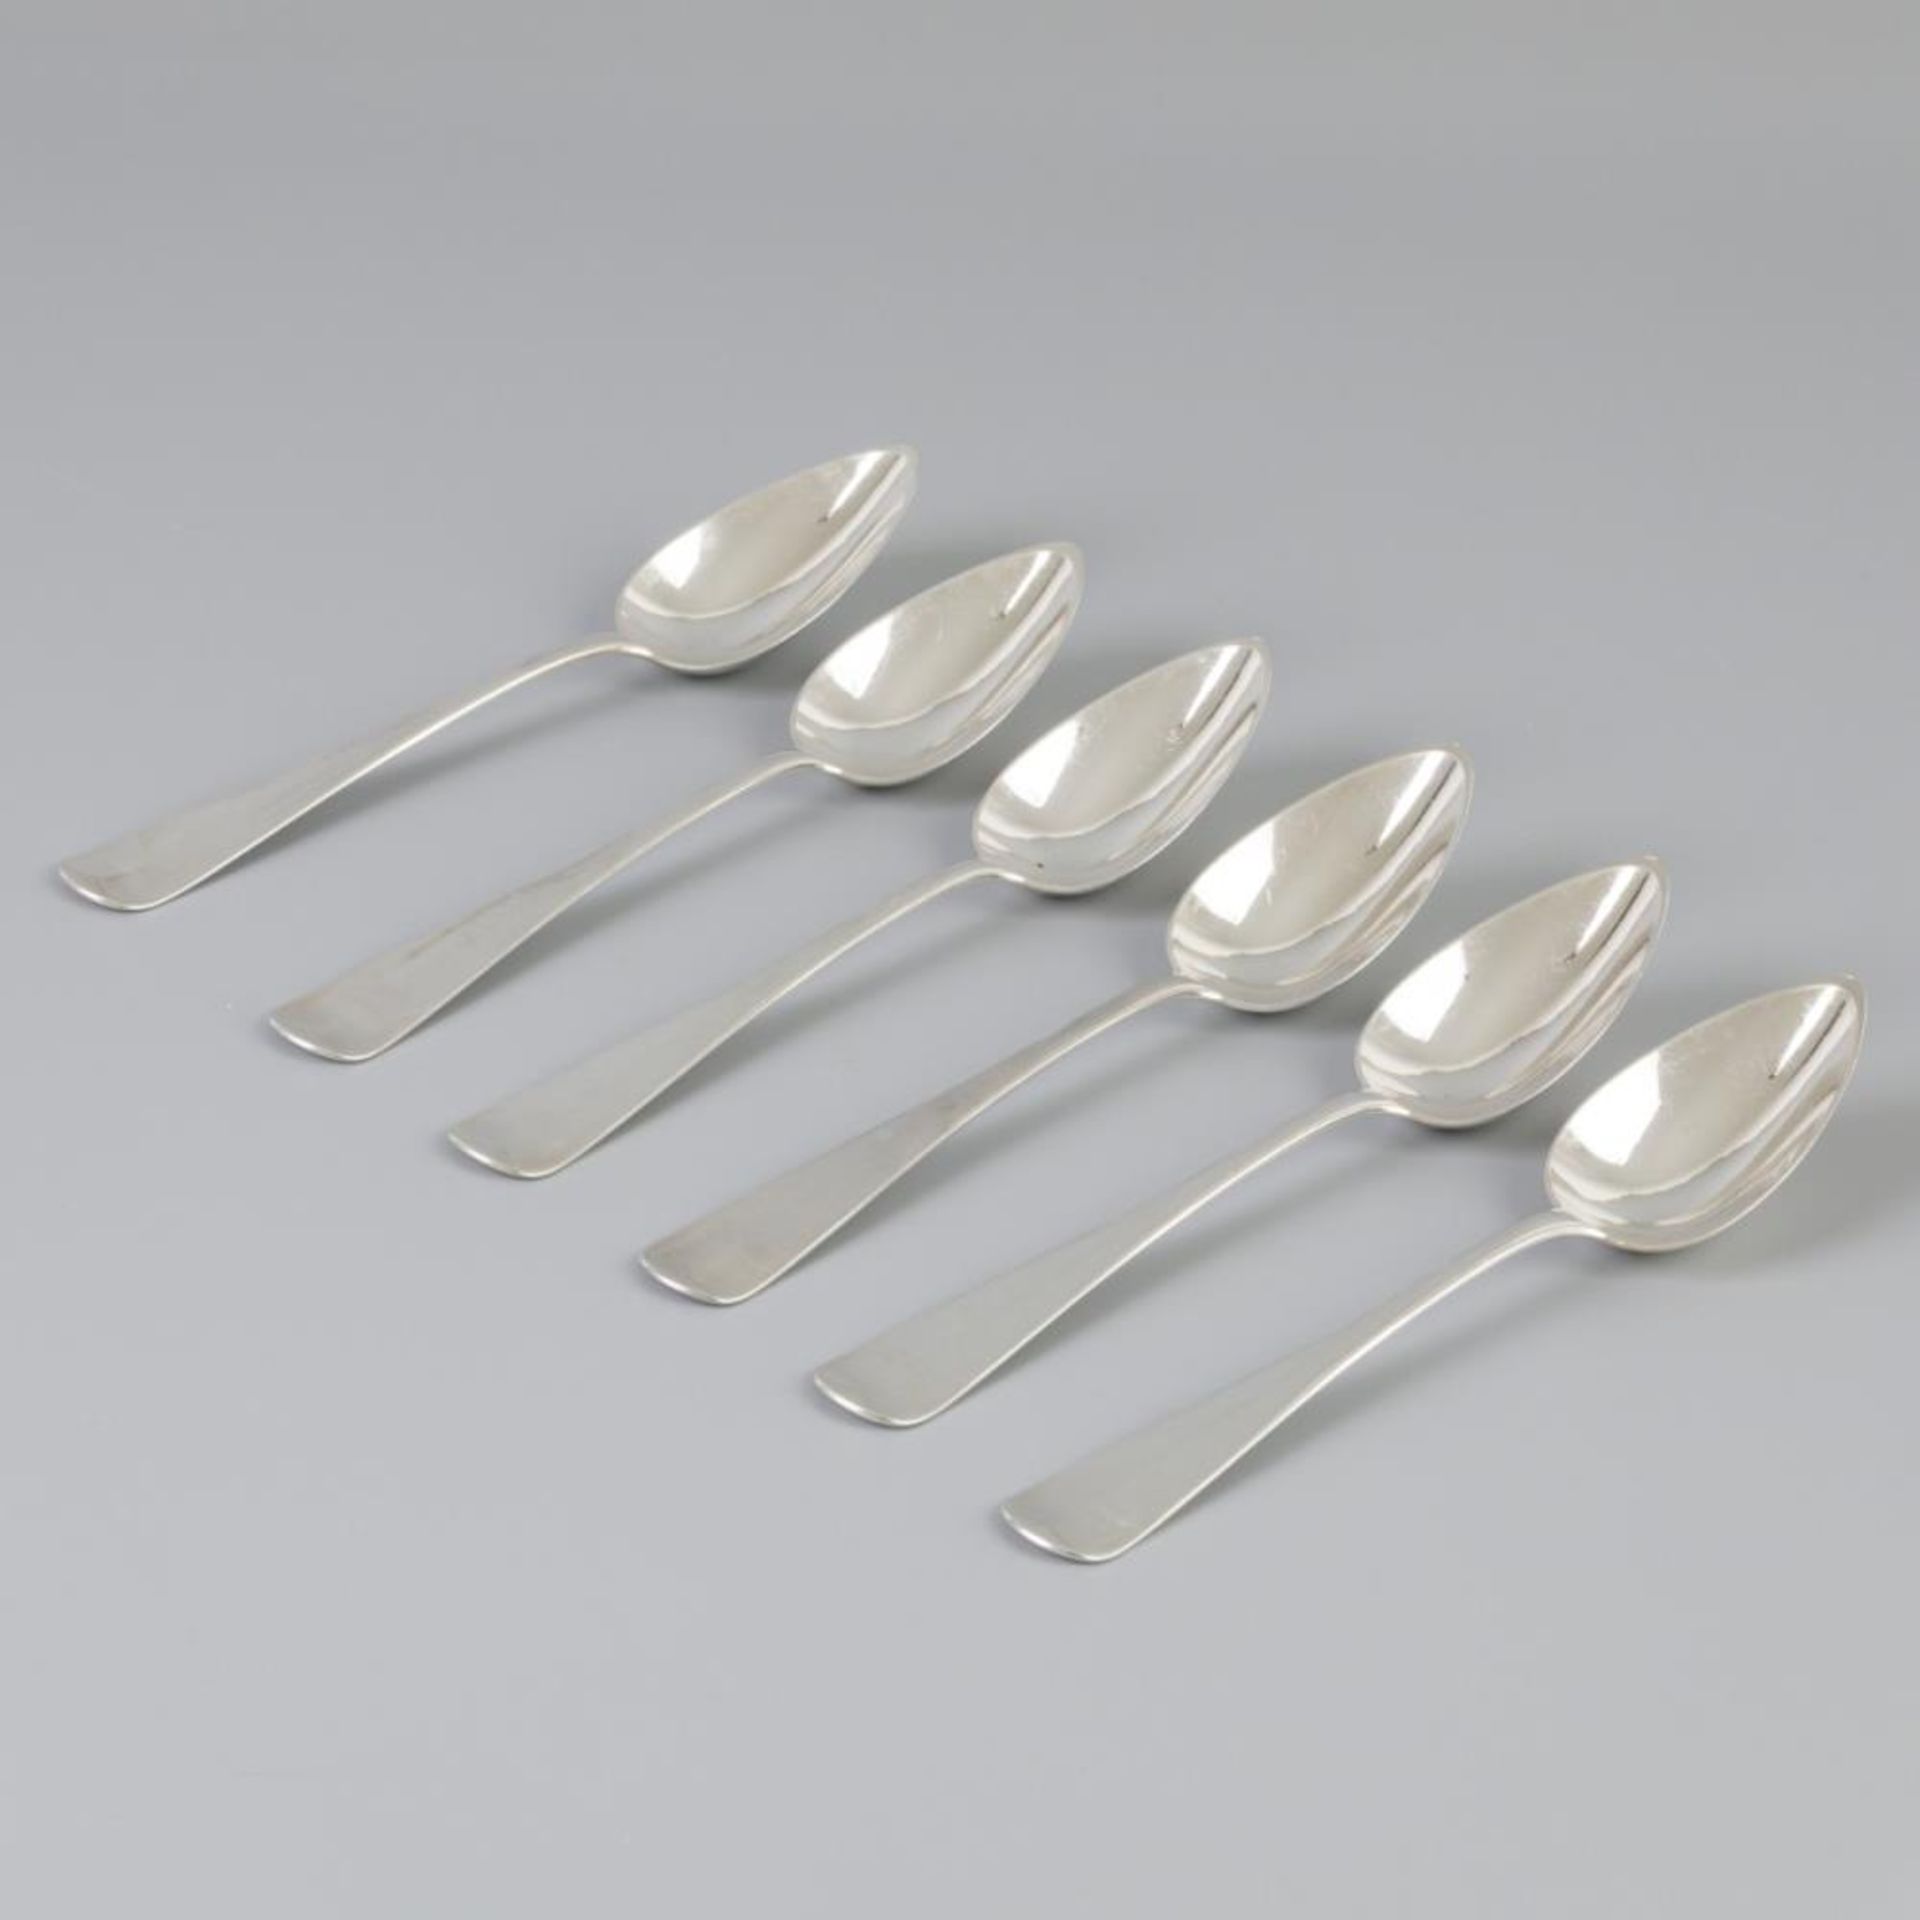 6 piece set of spoons "Haags Lofje" silver.